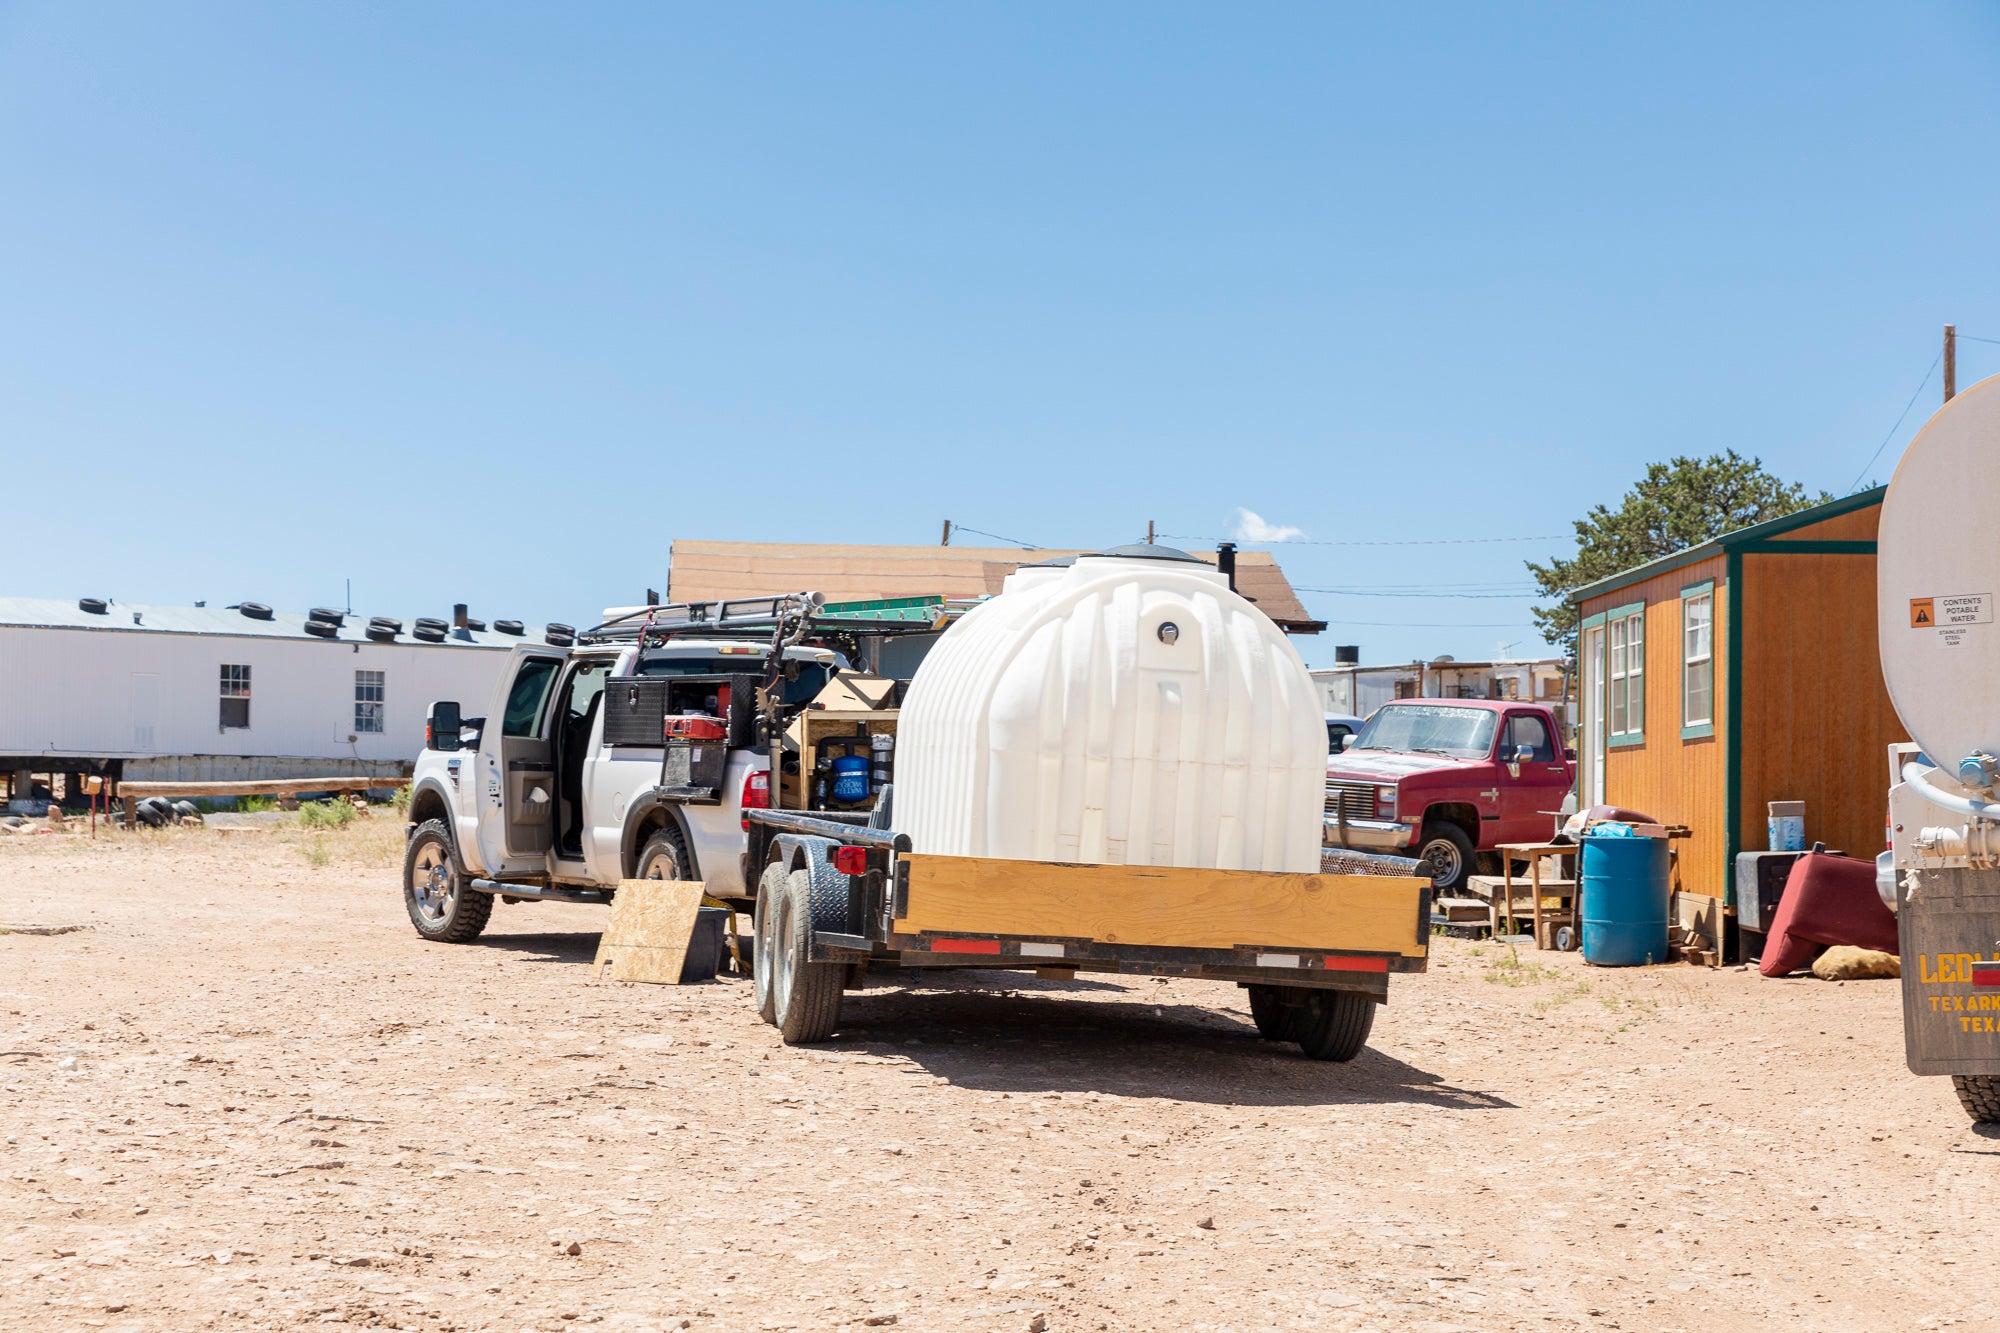 The Navajo Water Project team work on installing a 1,200-gallon tank at a family’s home outside of Prewitt, New Mexico